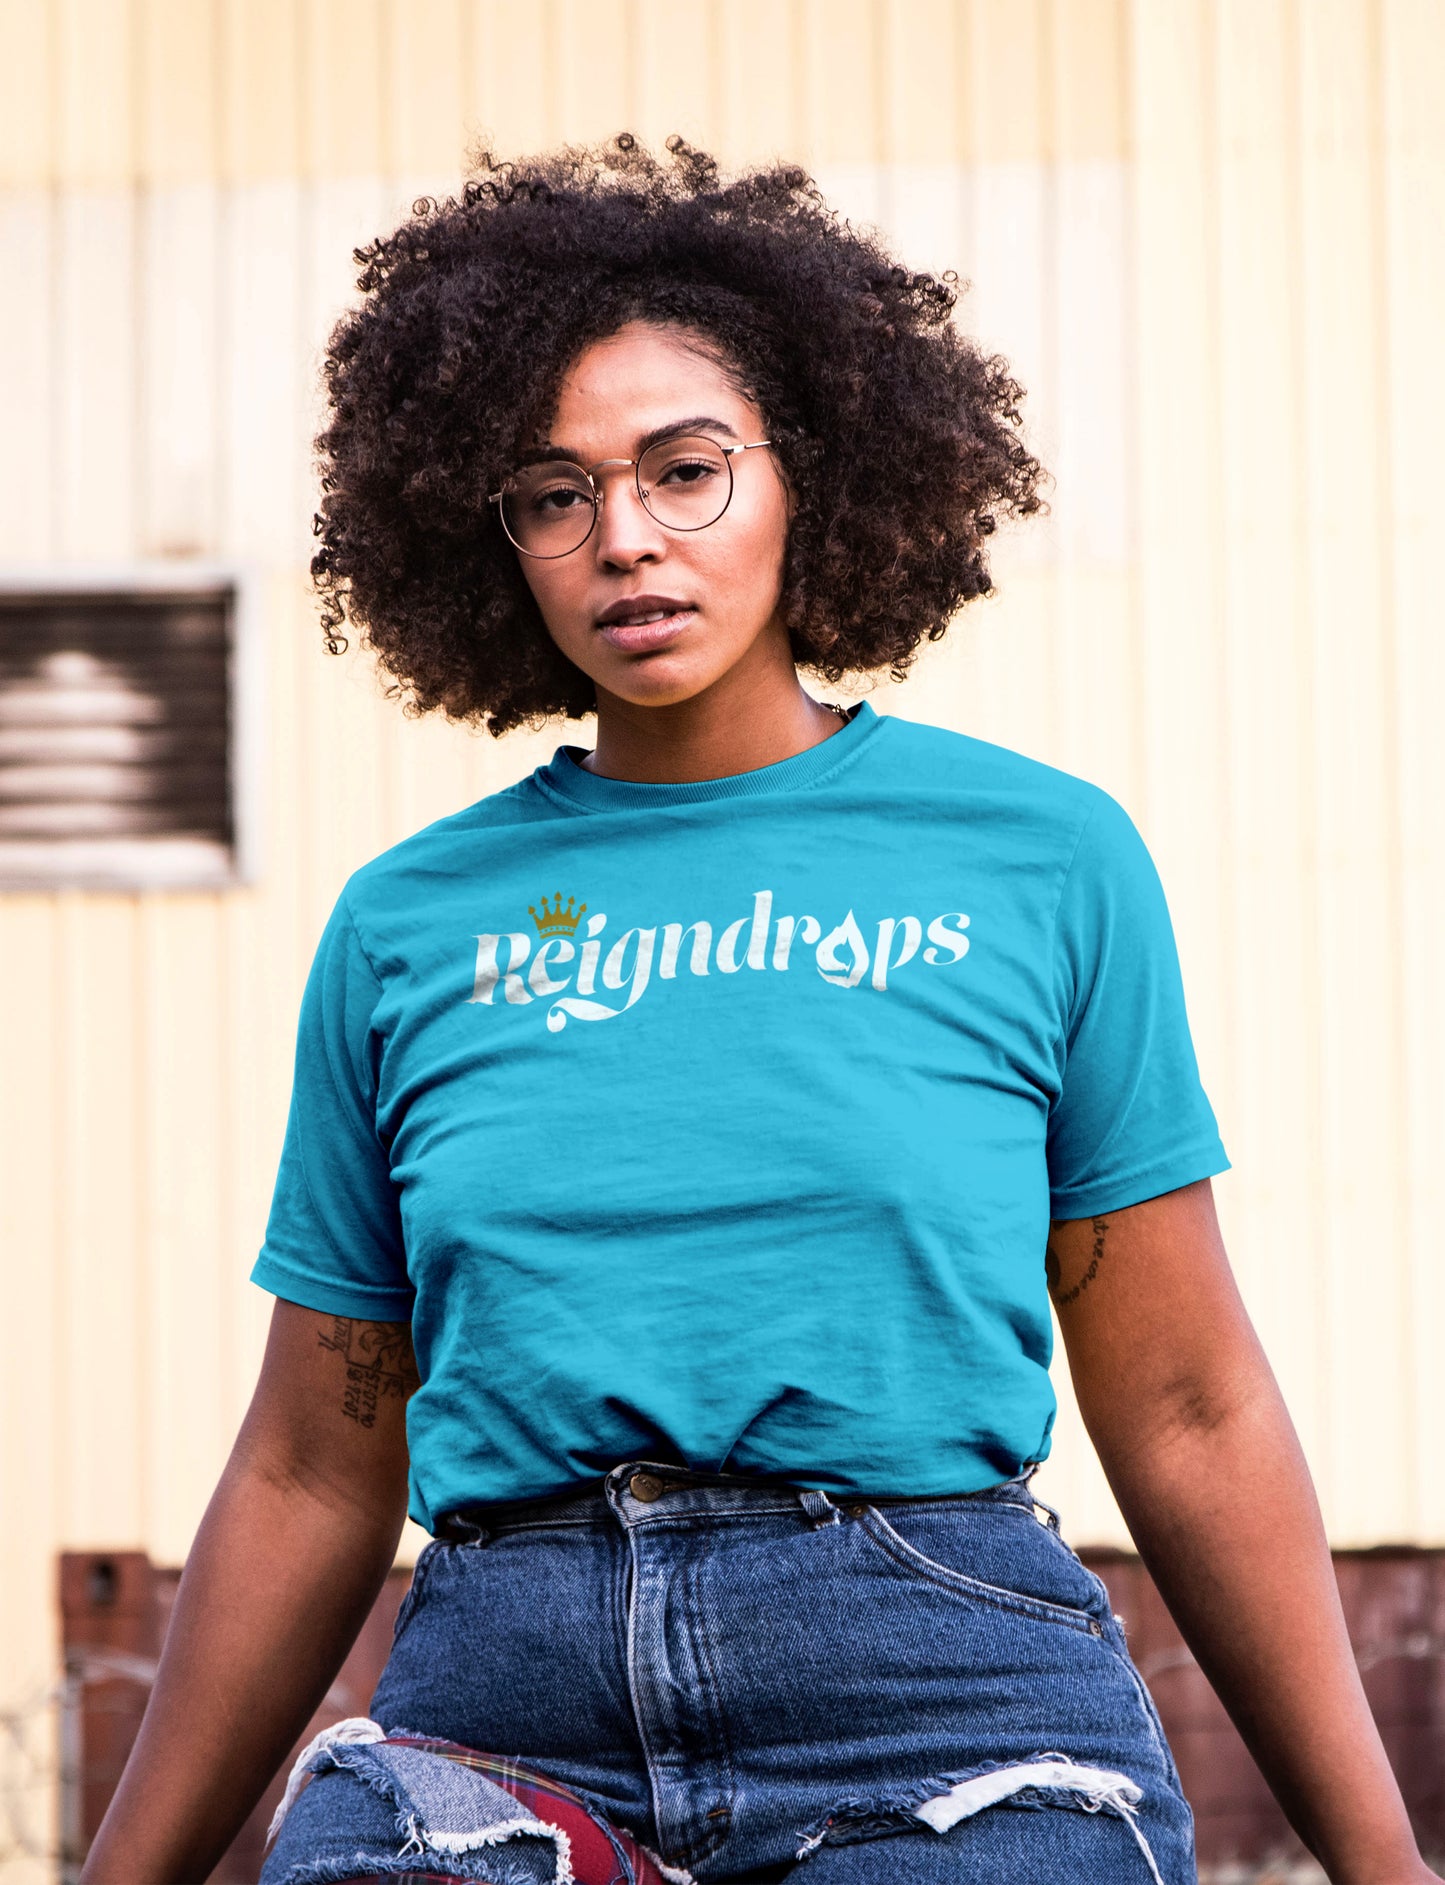 Reigndrops Tee for Women